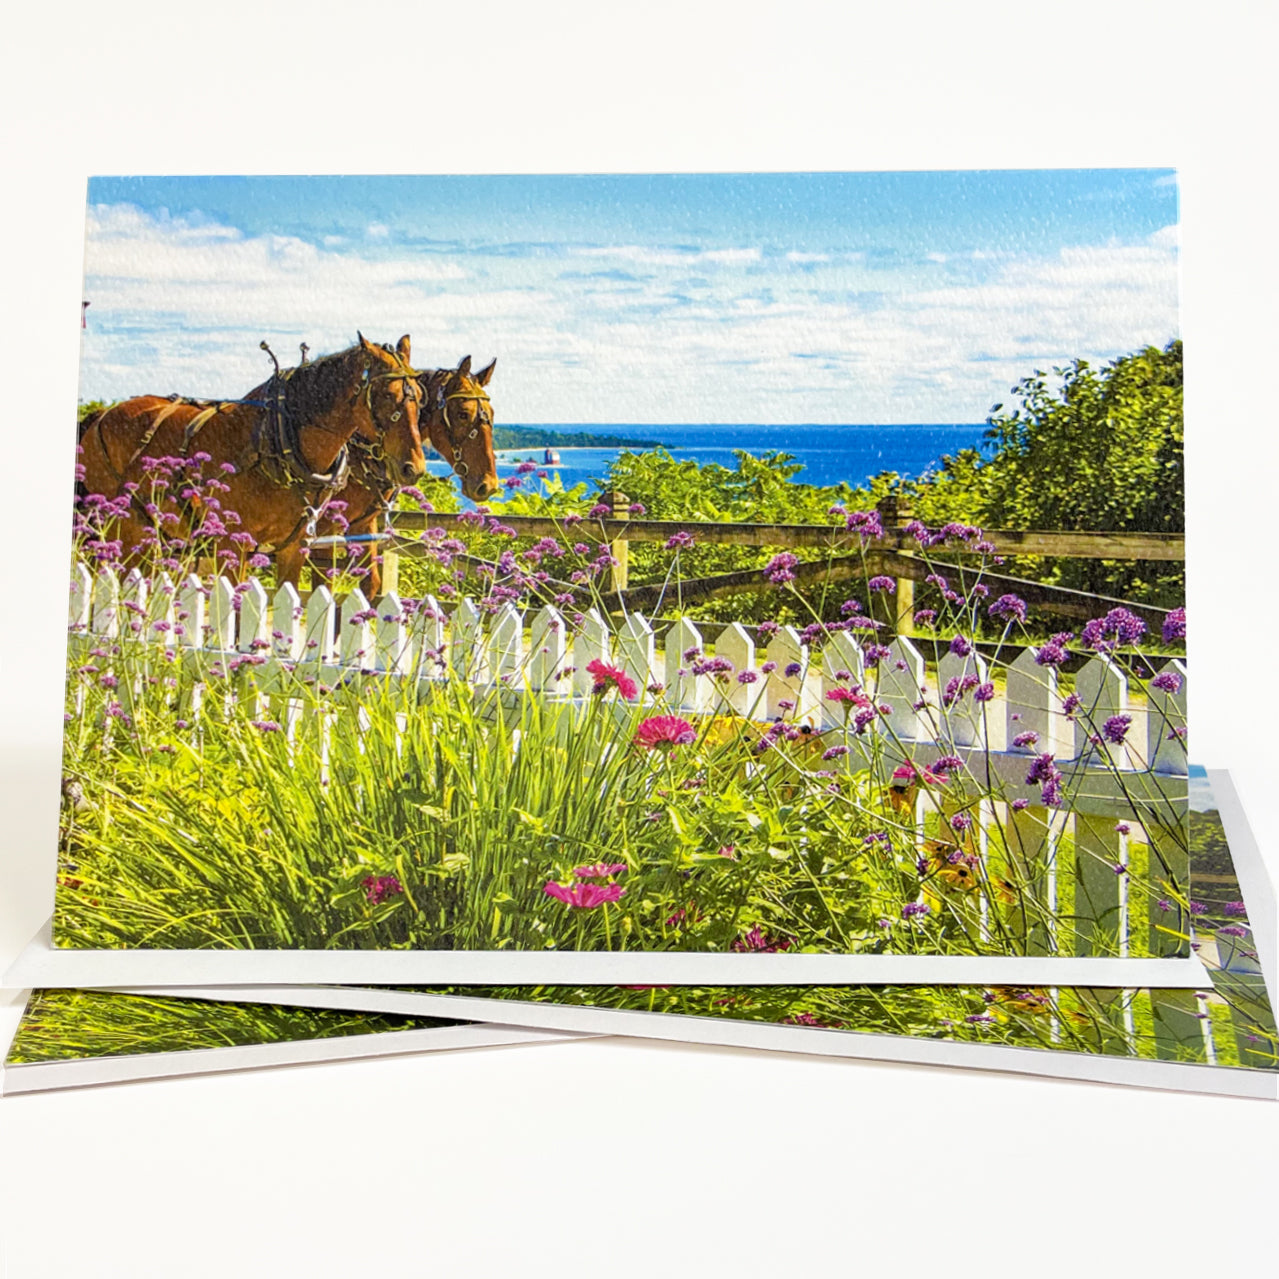 Blank greeting card featuring a photograph of a horse-drawn carriage on the West Bluff of Mackinac Island by local artist Jennifer Wohletz of Mackinac Memories. 